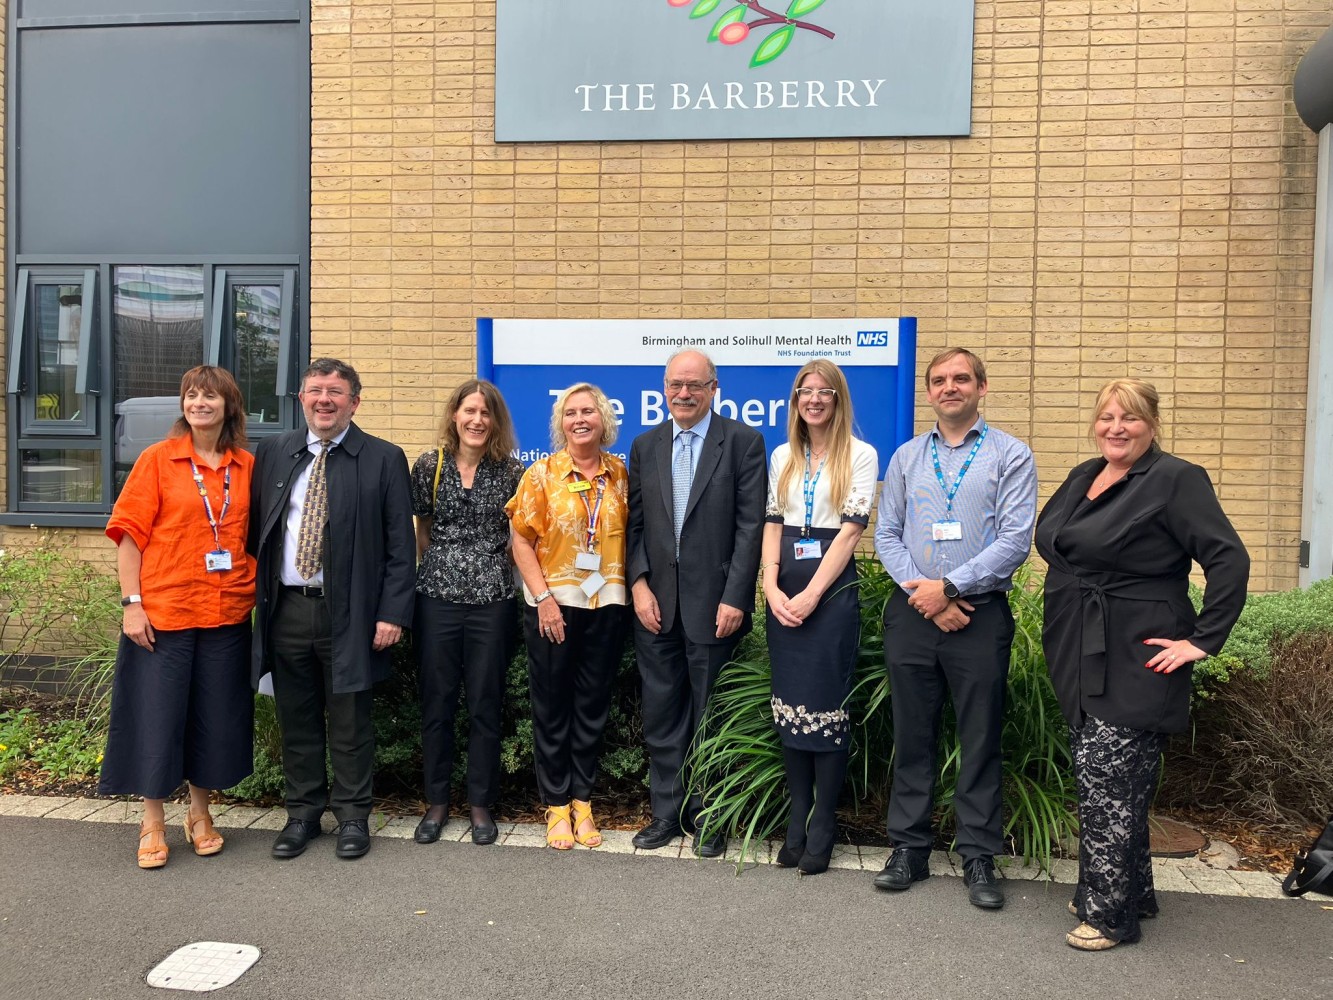 NHS England visits three specialist services at our Barberry Centre